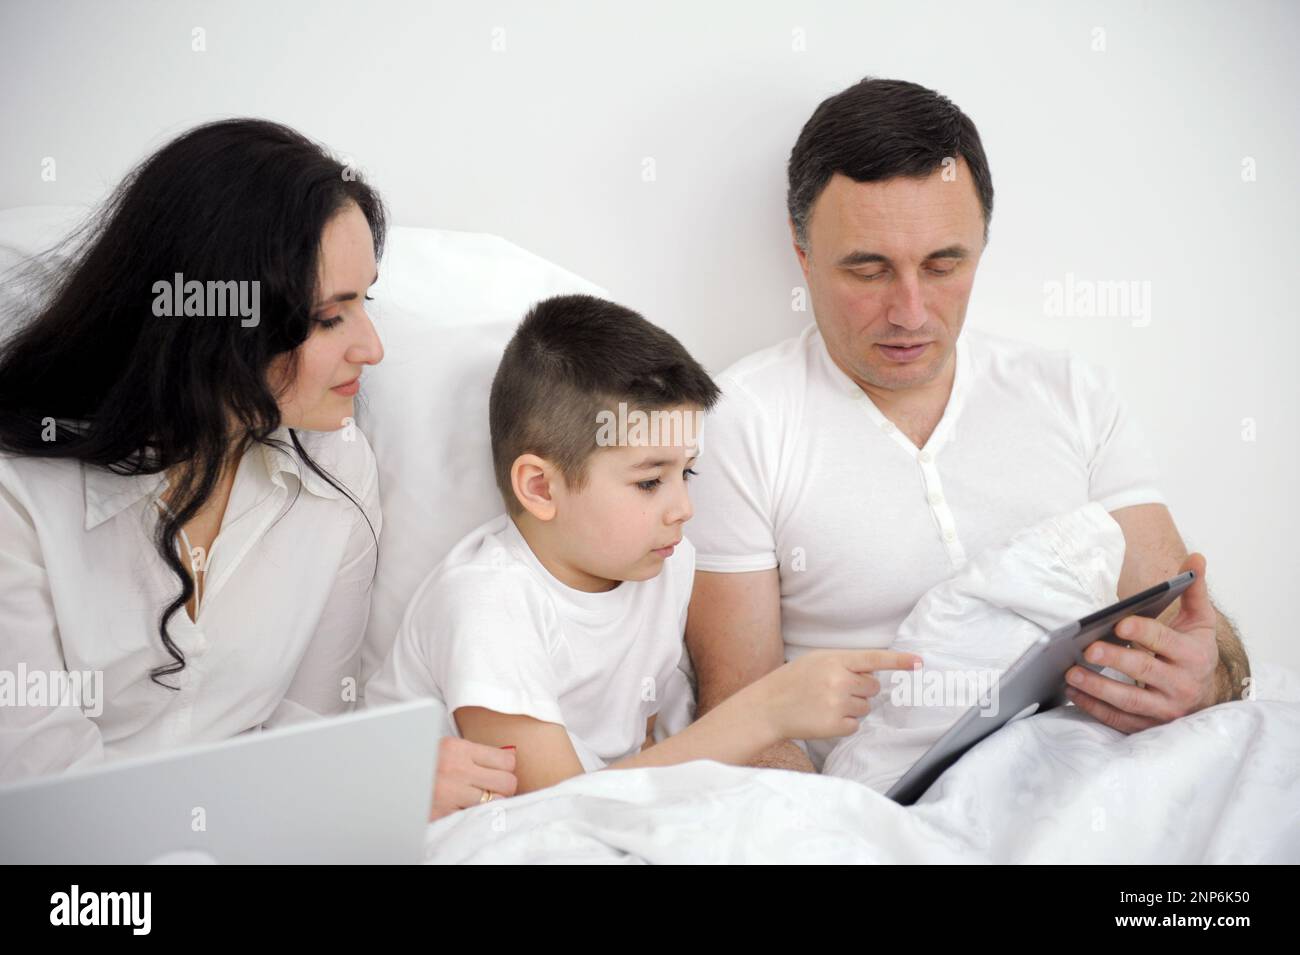 banner latest technology family husband wife and child sitting watching movie on laptop on bed relaxing together white clothes chatting online with relatives mom dad and son laughing smiling rejoicing Stock Photo